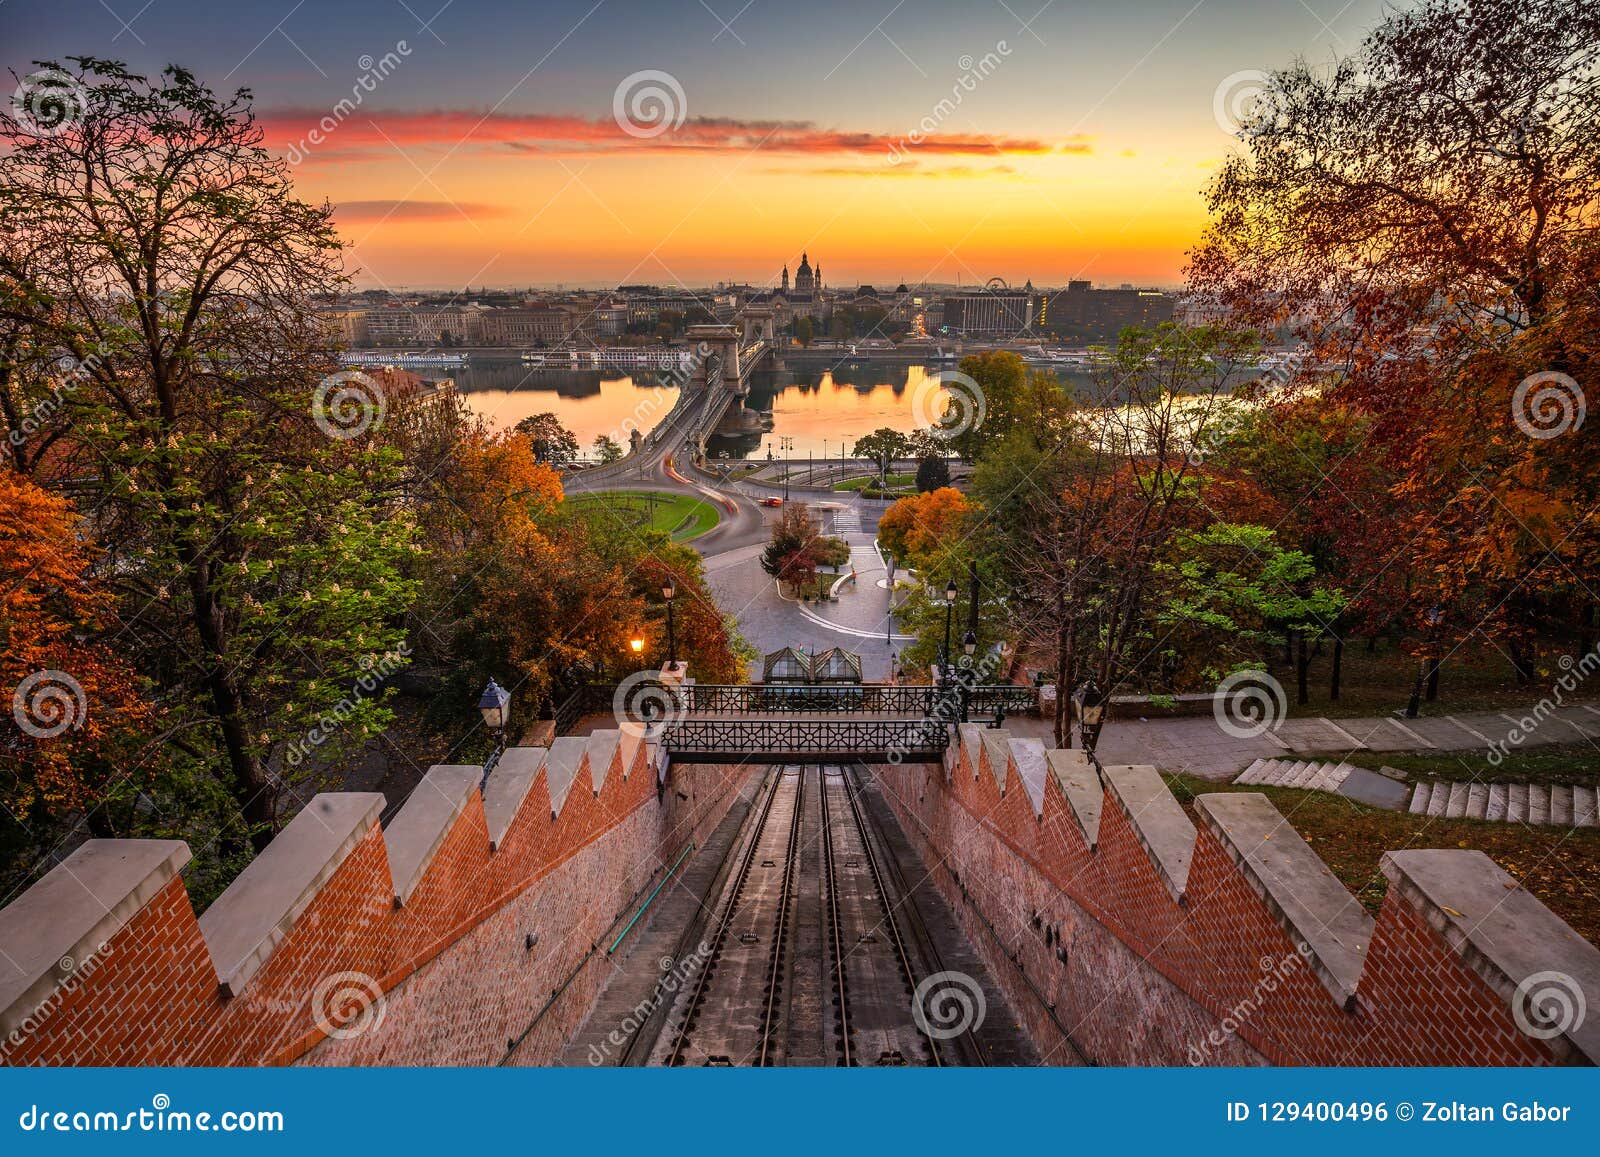 budapest, hungary - autumn in budapest. the castle hill funicular budavÃÂ¡ri siklo with the szechenyi chain bridge